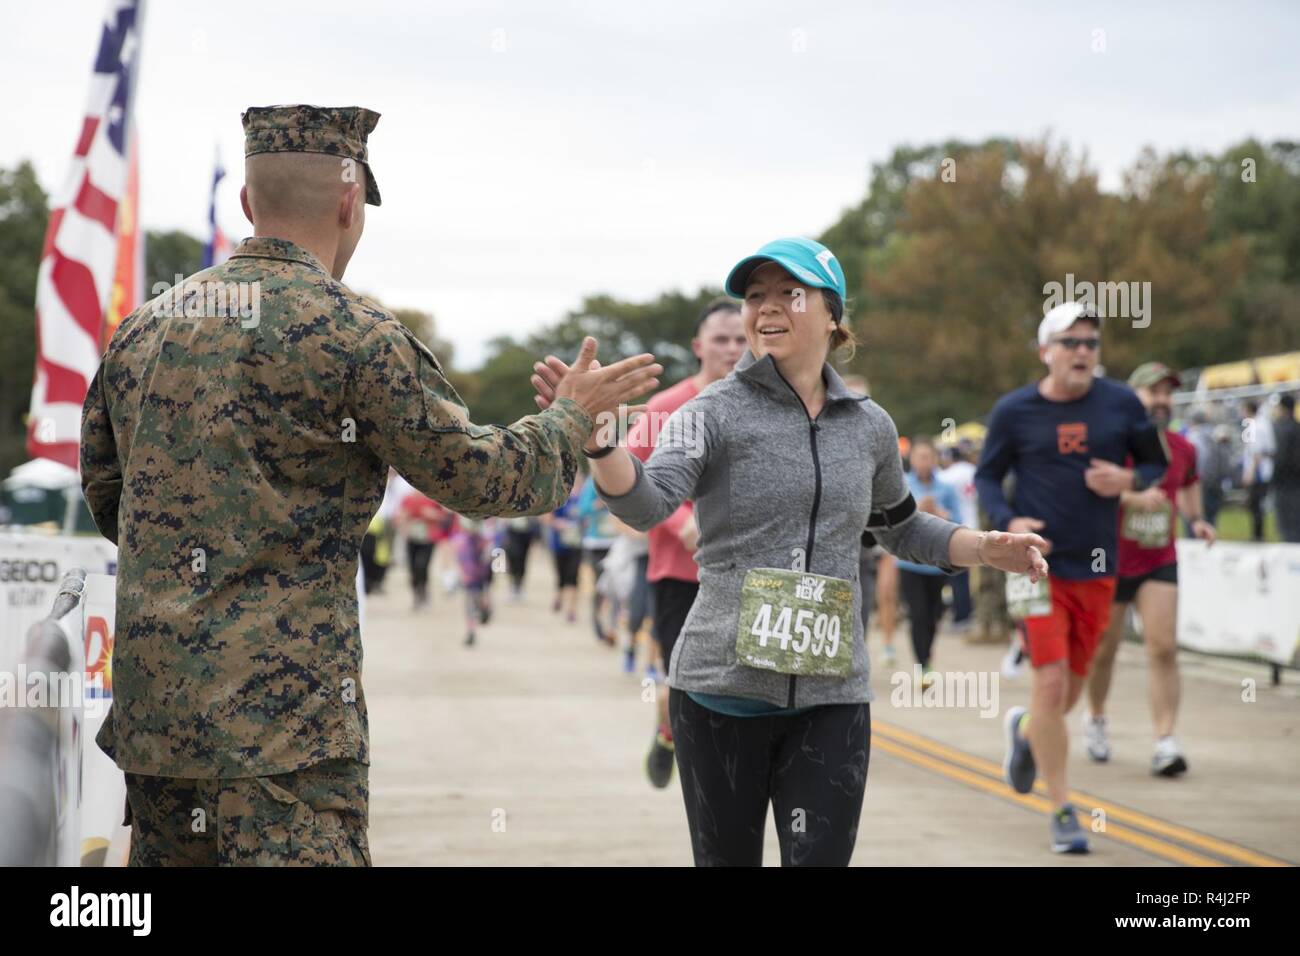 A participant of the 43rd Marine Corps Marathon 10K high fives a Marine as a she runs towards the finish line at the Marine Corps War Memorial, Arlington, Va., Oct. 28, 2018. Also known as 'The People's Marathon,' the race drew roughly 30,000 participants to promote physical fitness, generate goodwill in the community, and showcase the organizational skills of the Marine Corps. Stock Photo